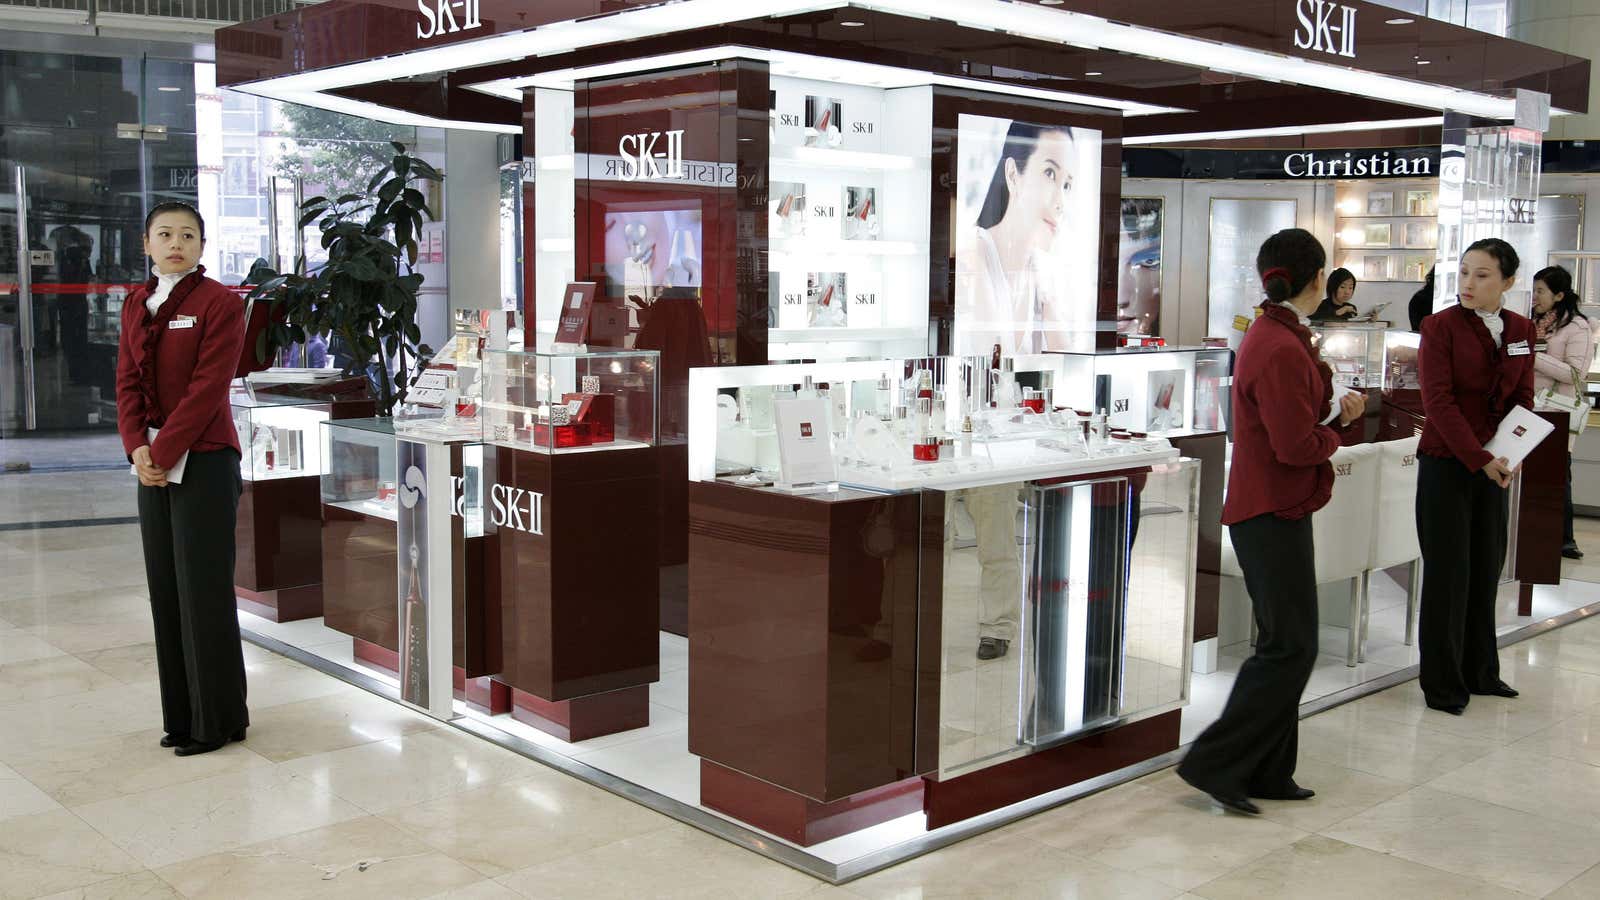 SK-II, one of the top prestige Japanese beauty brands, is hot in China.